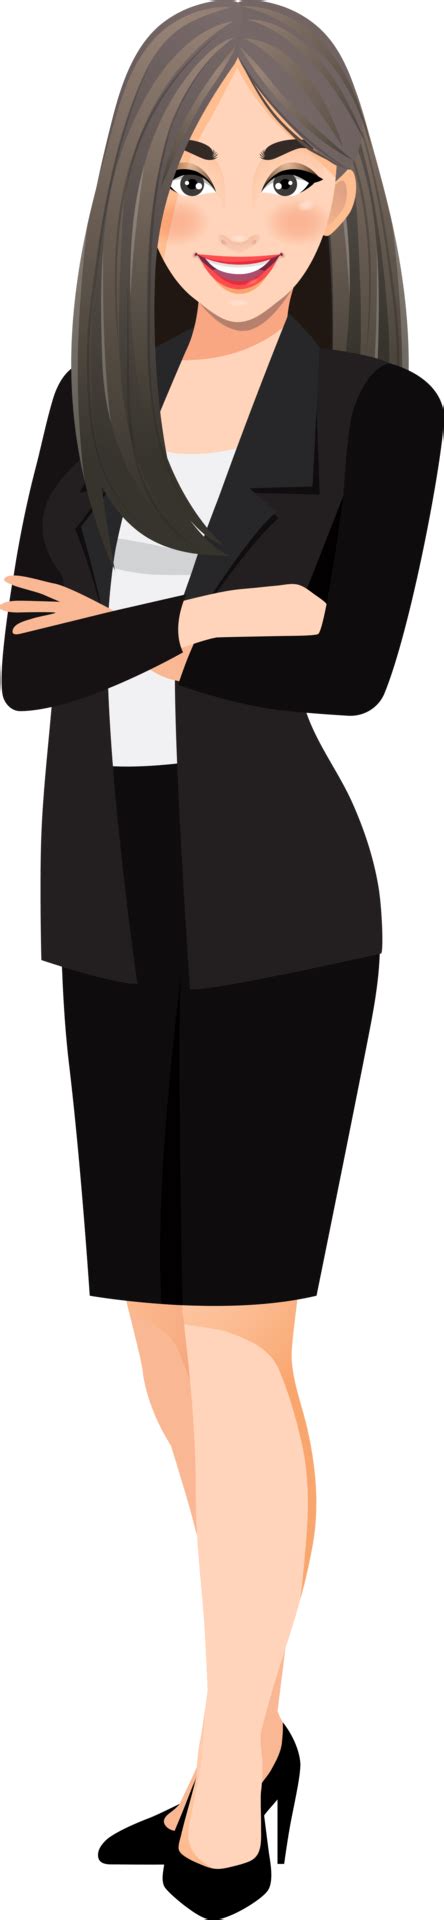 Flat Icon With Businesswoman Cartoon Character In Office Style Smart Suit And Crossed Arms Pose